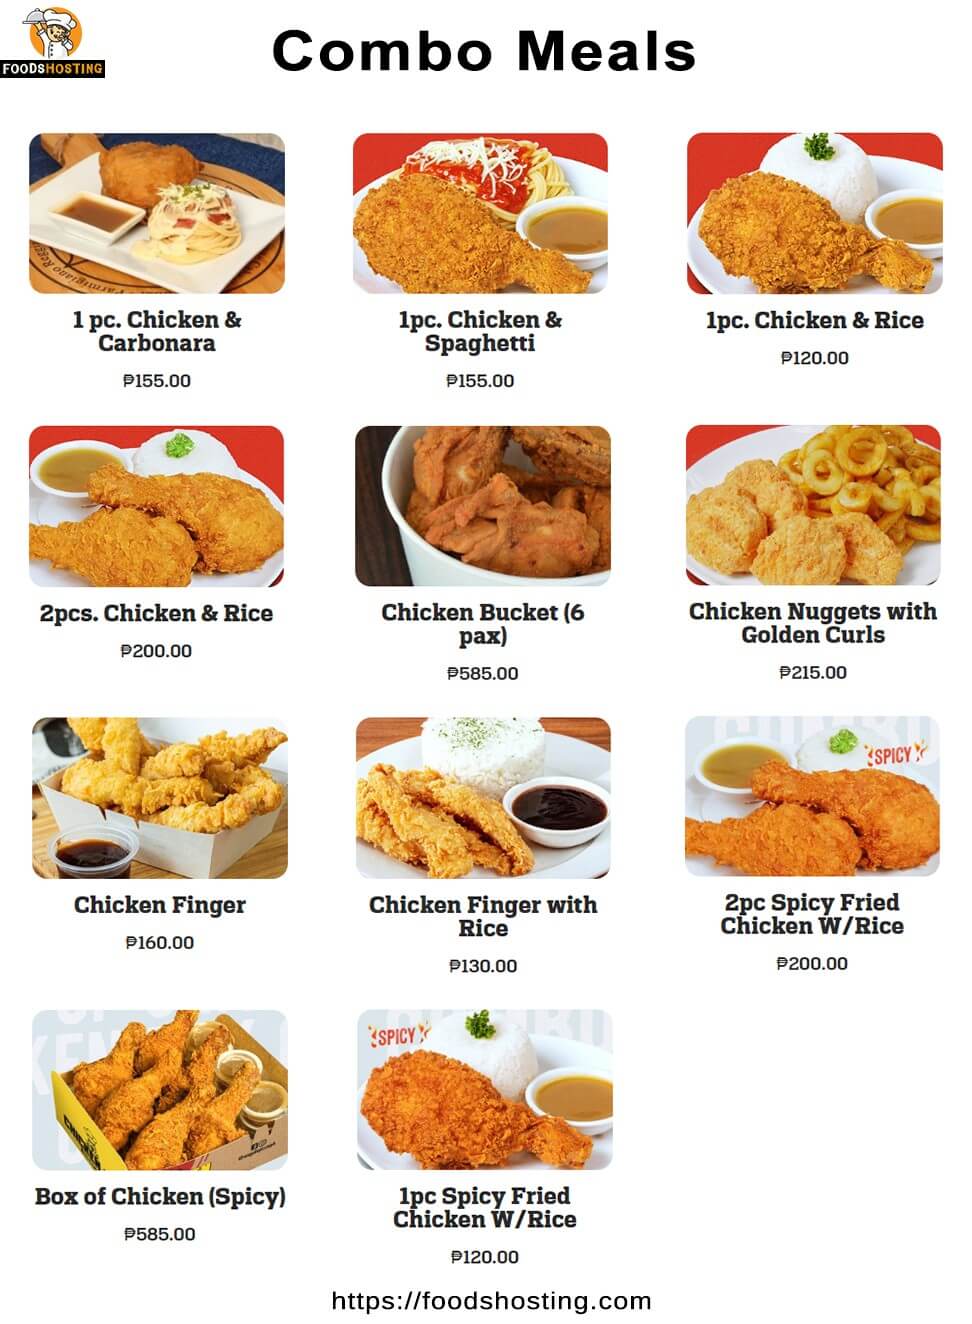 Angel’s Pizza Combo Meals Prices